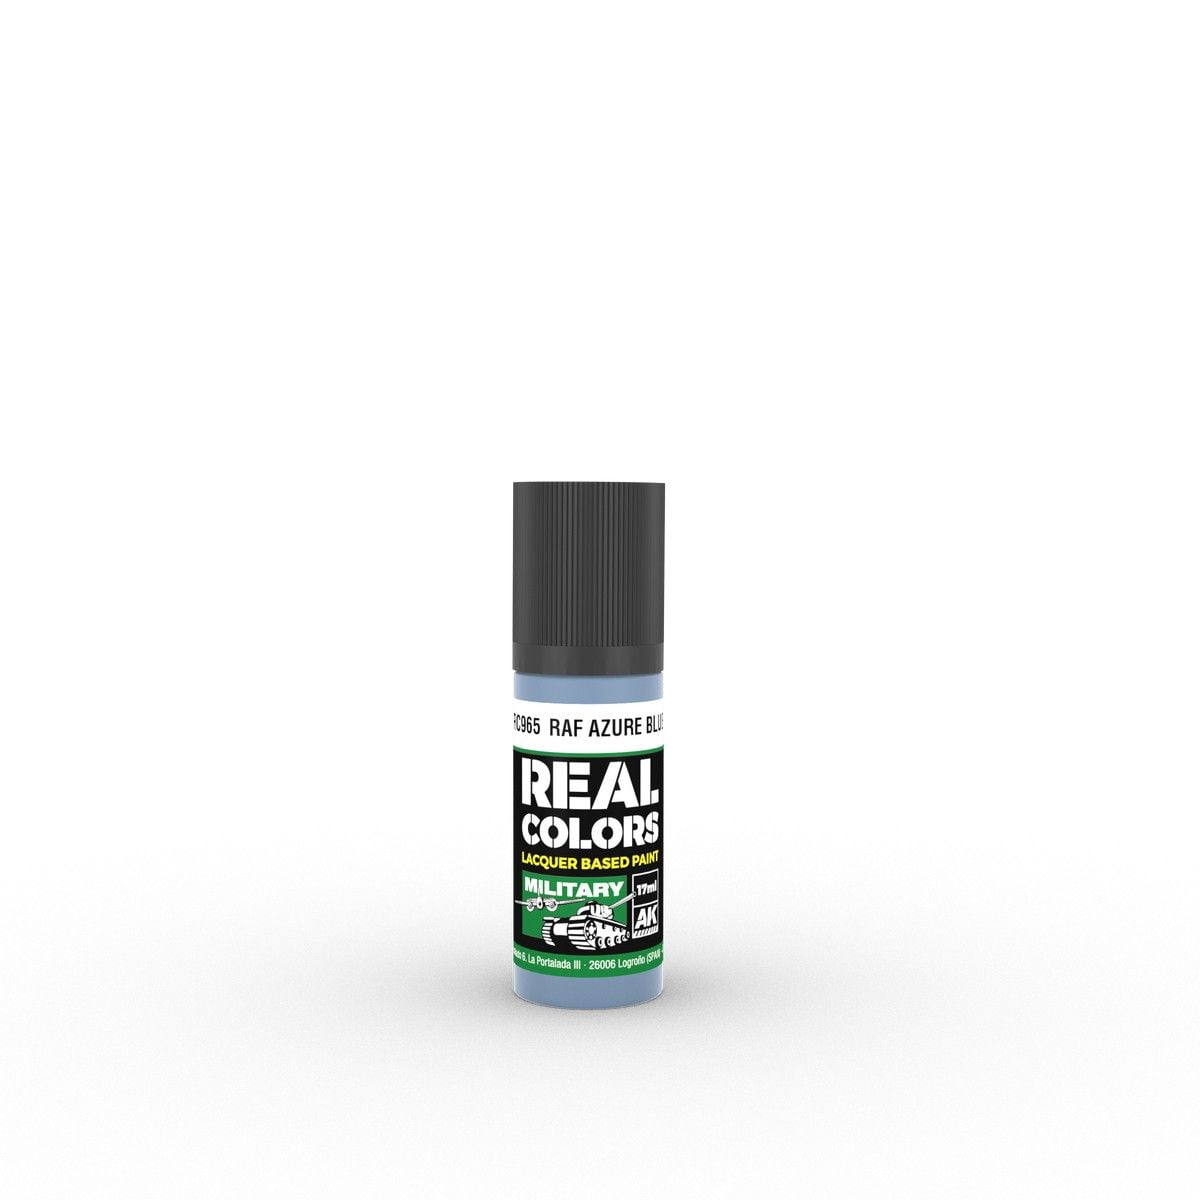 Real Colors Military: RAF Azure Blue 17ml